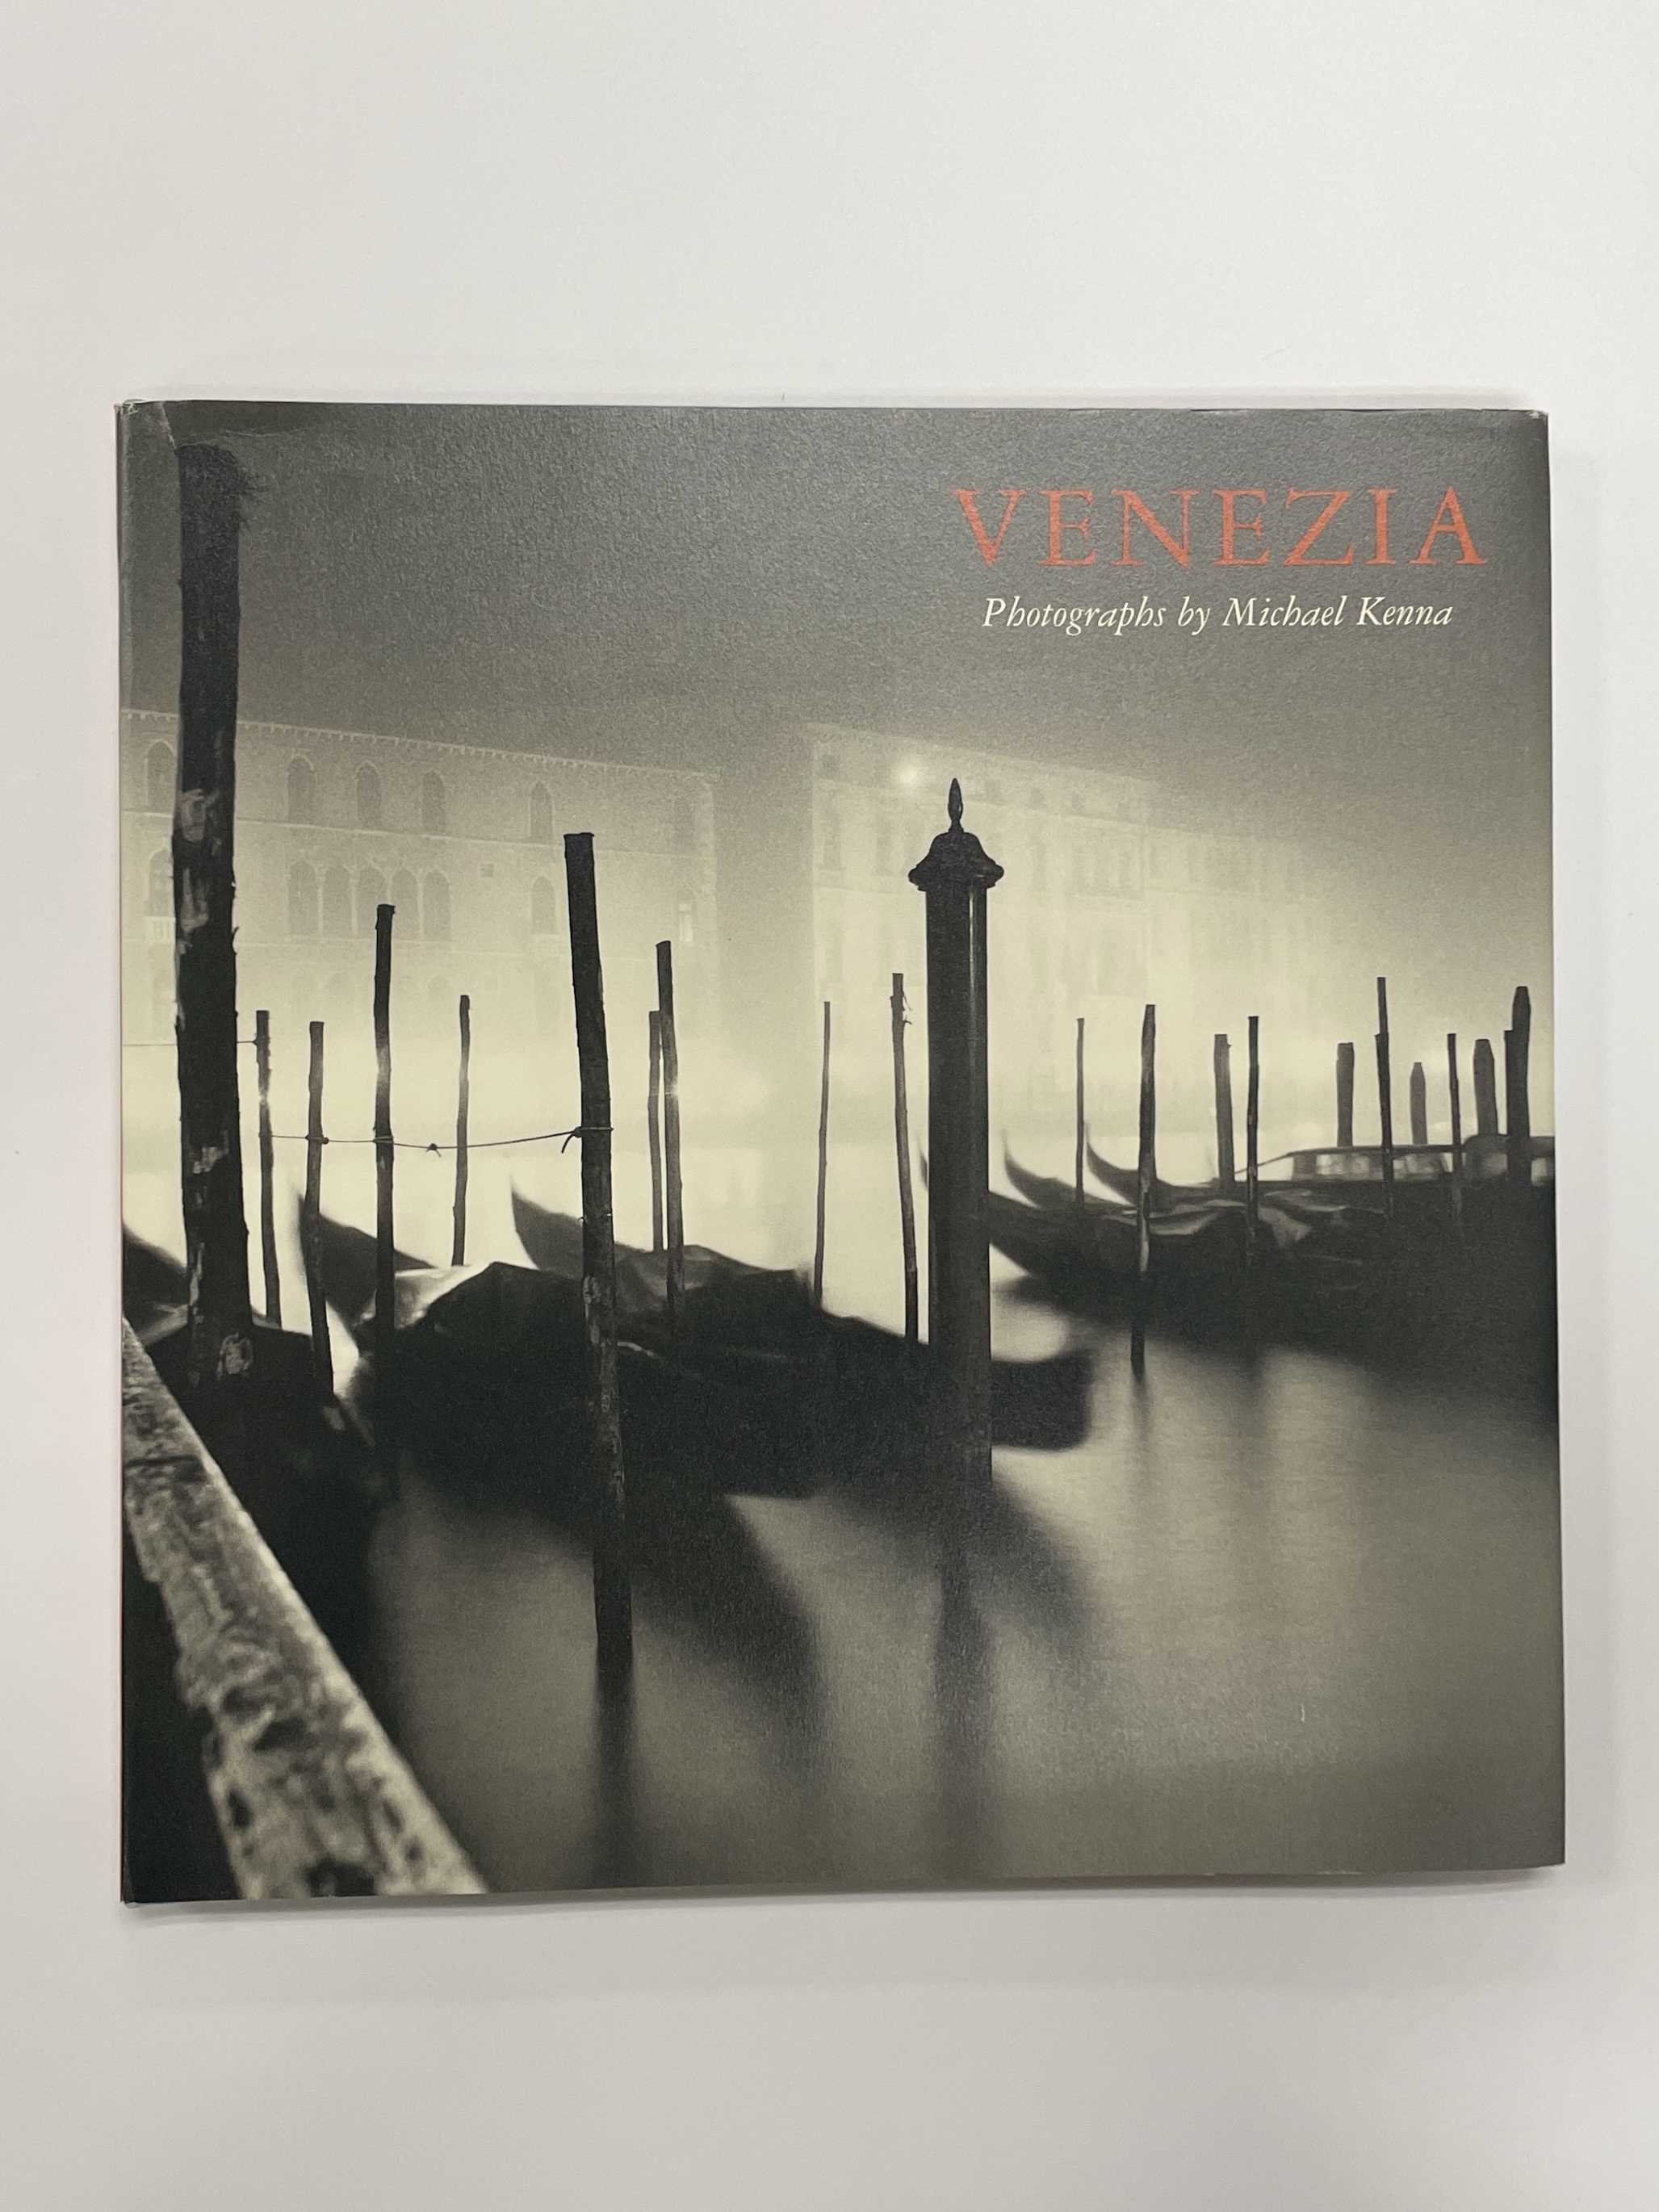 PHOTOGRAPHY BOOKS - MICHAEL KENNA - Image 9 of 9